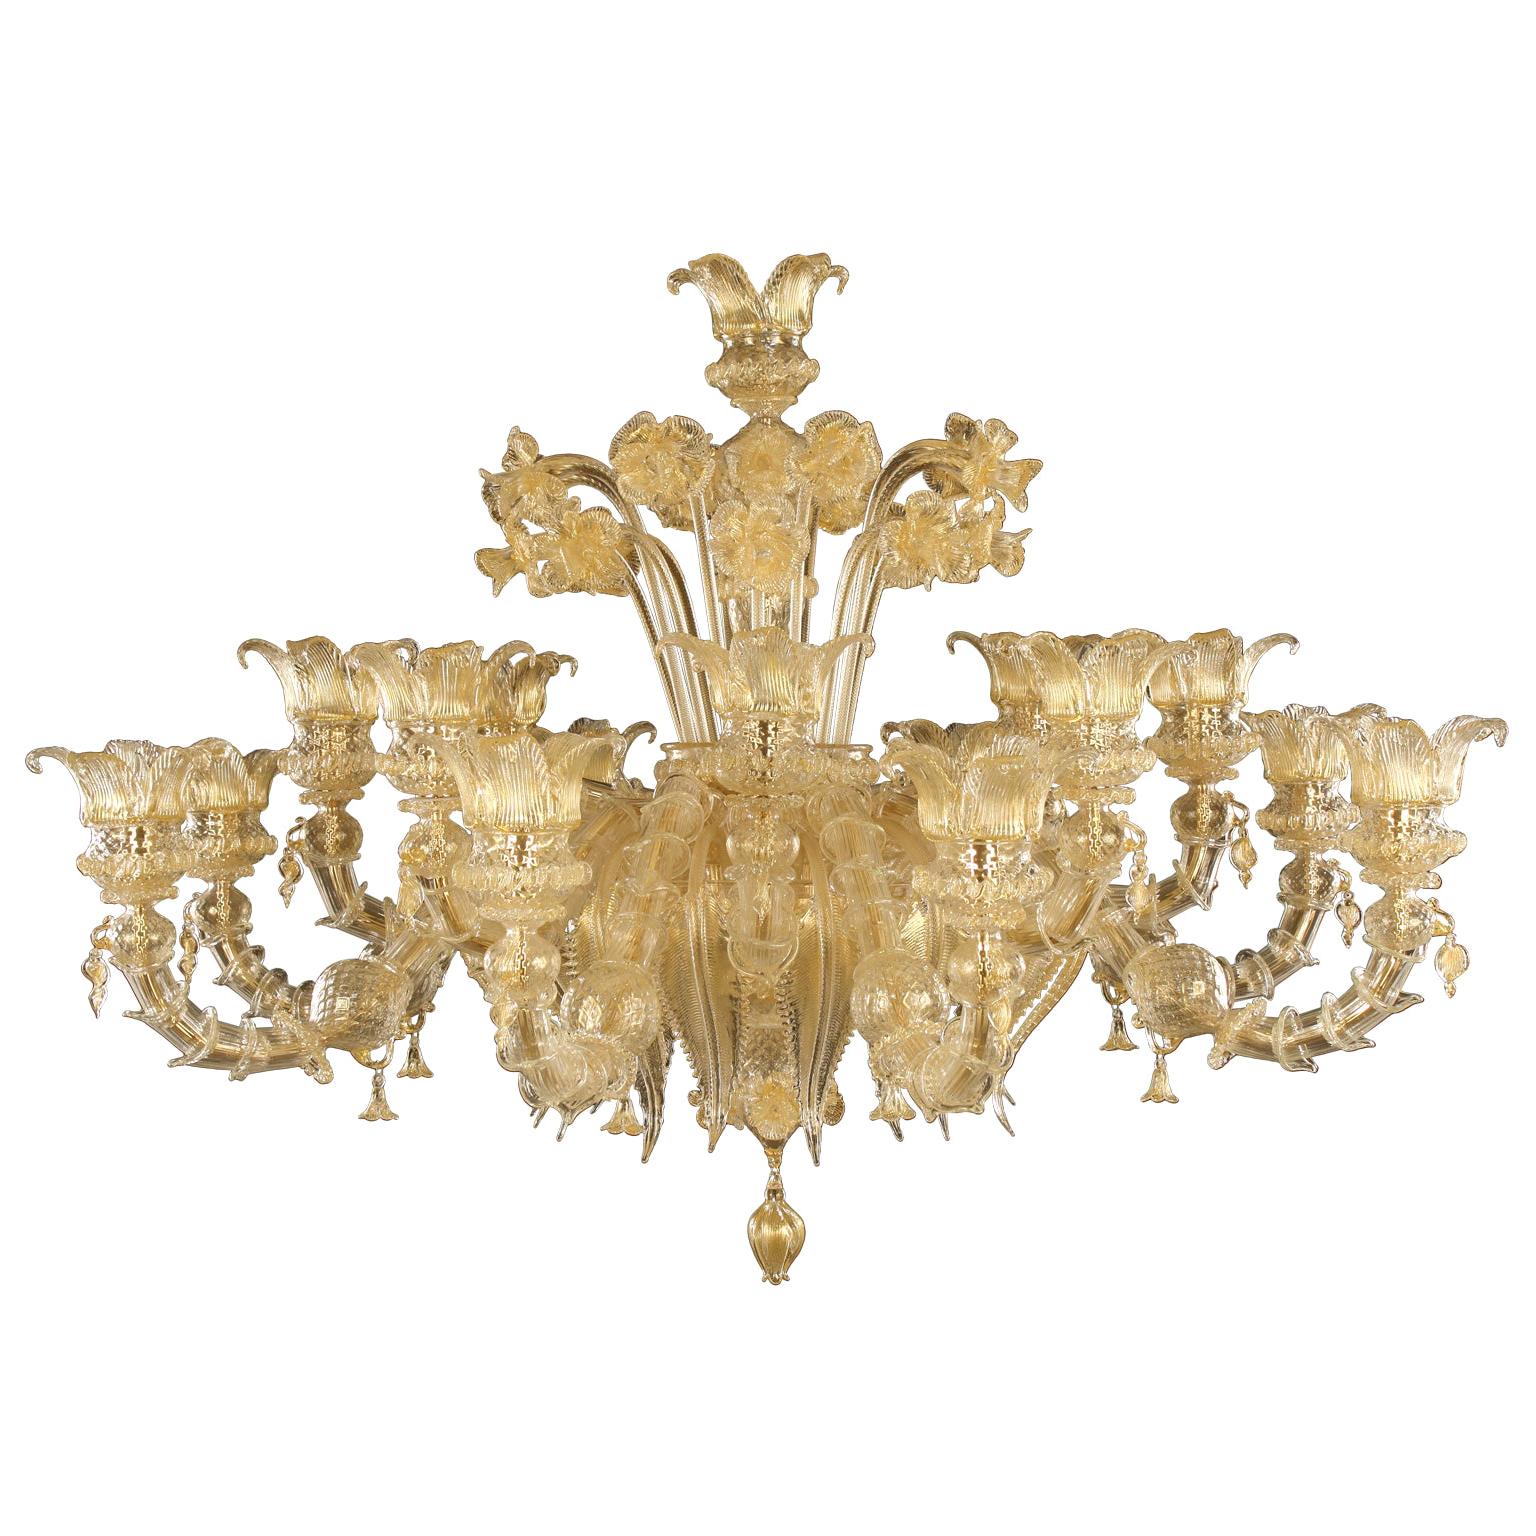 Luxury Artistic Rezzonico Chandelier 8+8 Arms Gold Murano glass by Multiforme For Sale